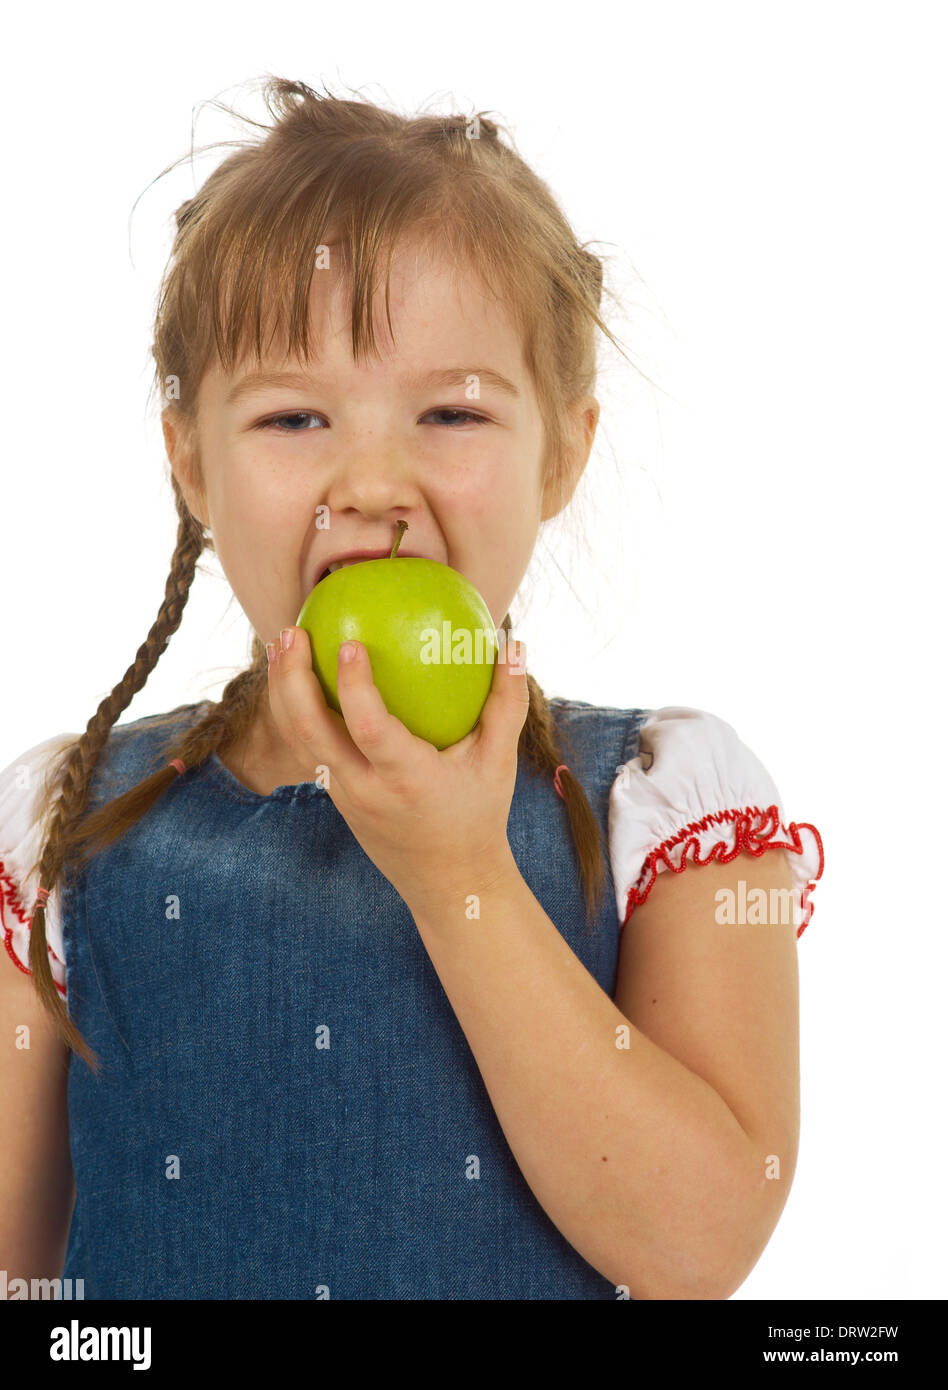 beautiful smiling caucasian girl child holding an apple.isolated on white Stock Photo